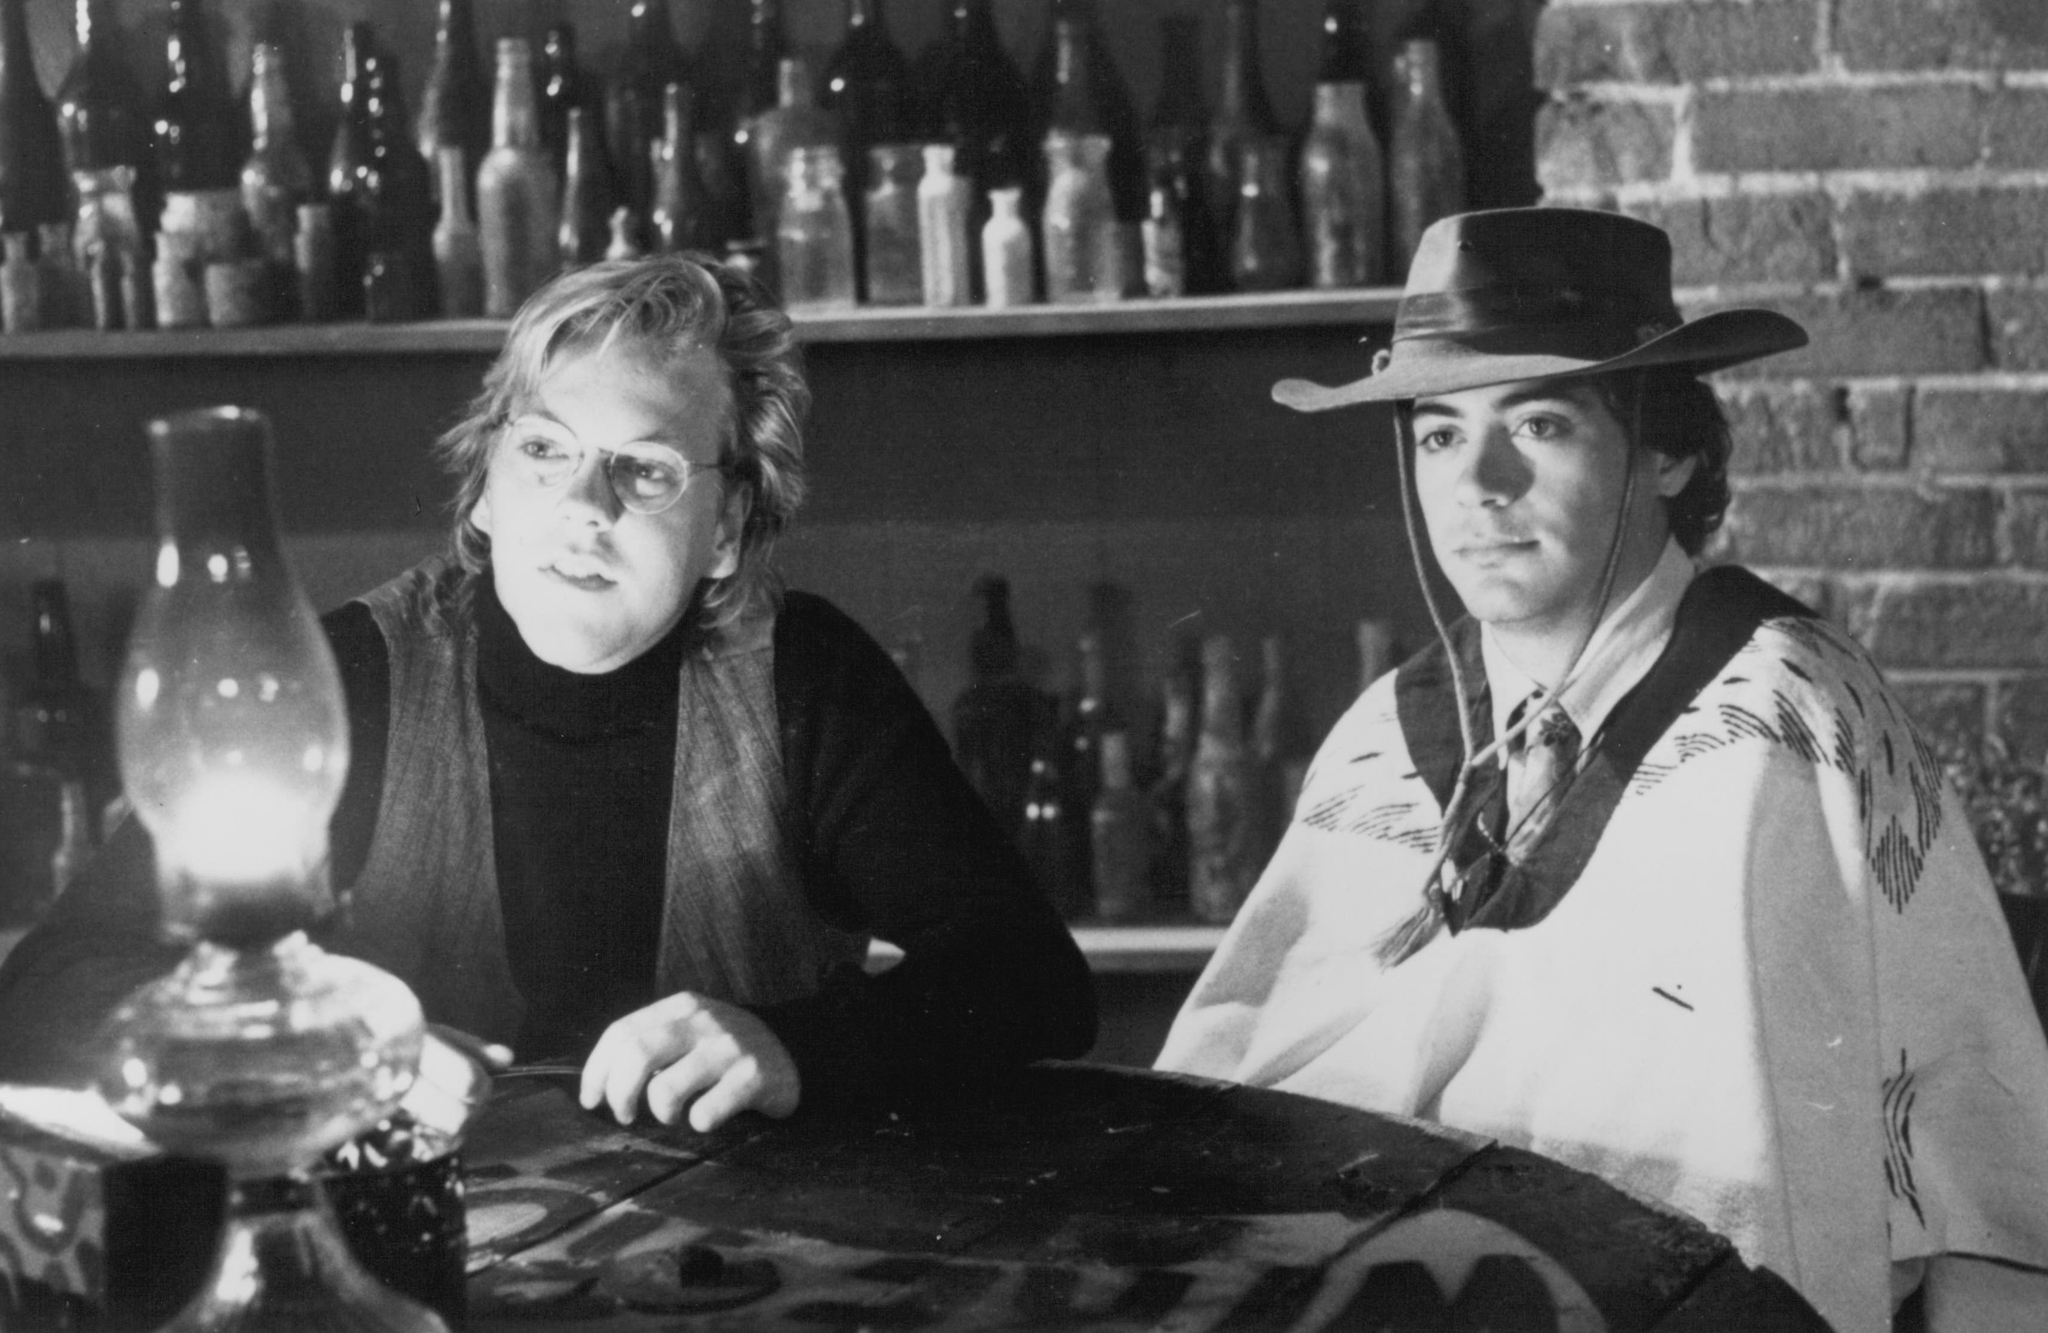 Still of Robert Downey Jr. and Kiefer Sutherland in 1969 (1988)